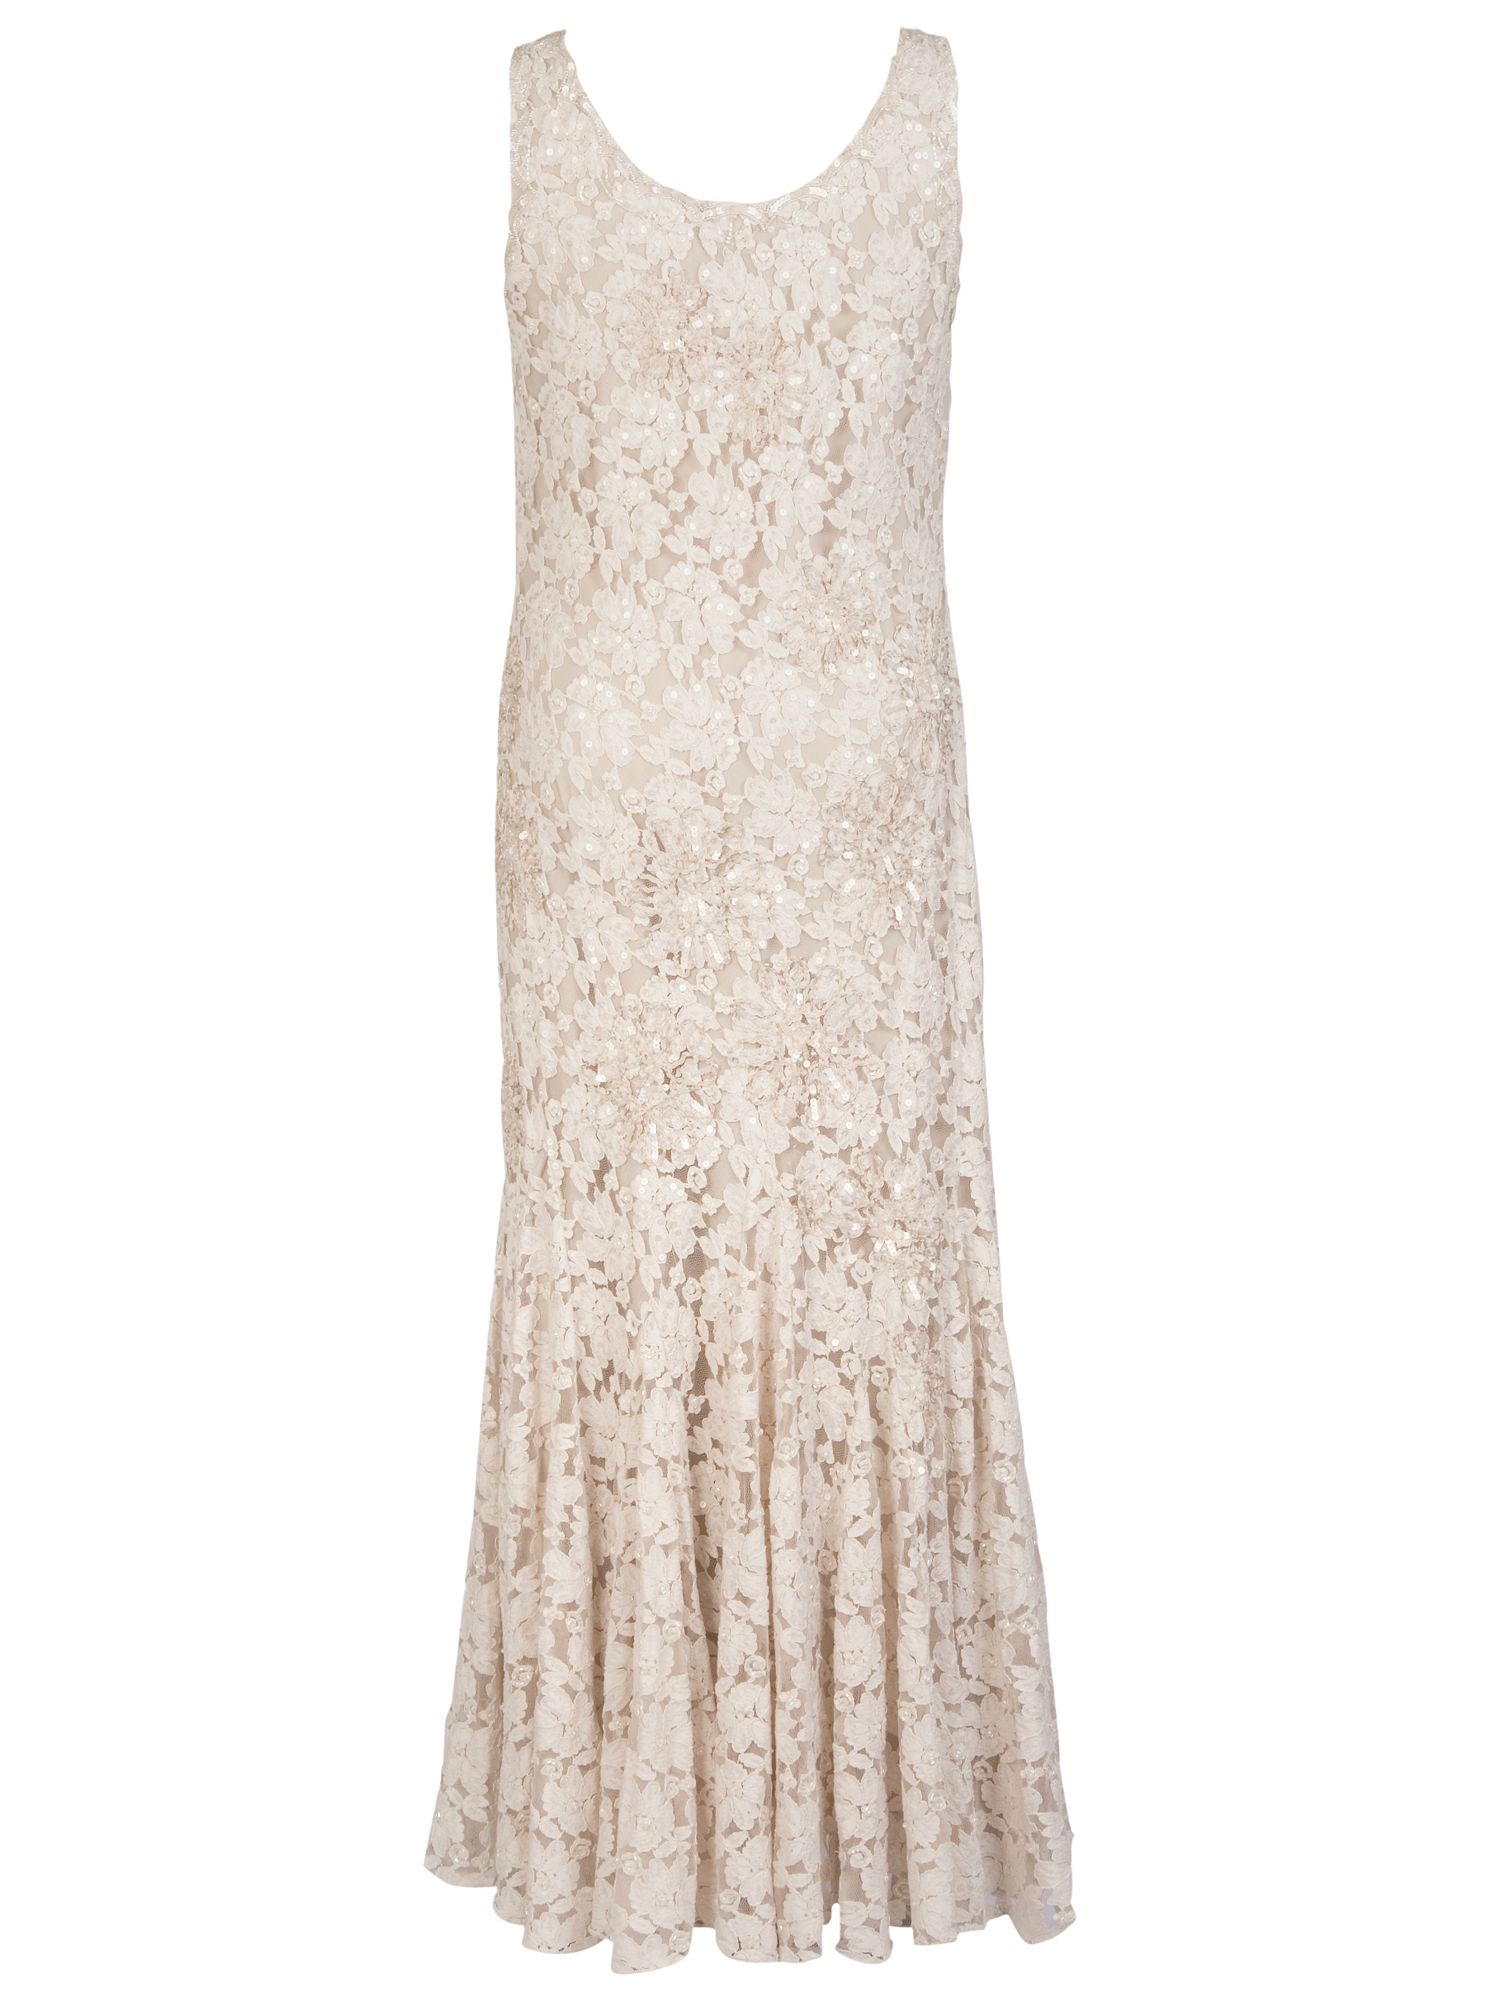 Chesca Pearl Beaded Dress at John Lewis & Partners